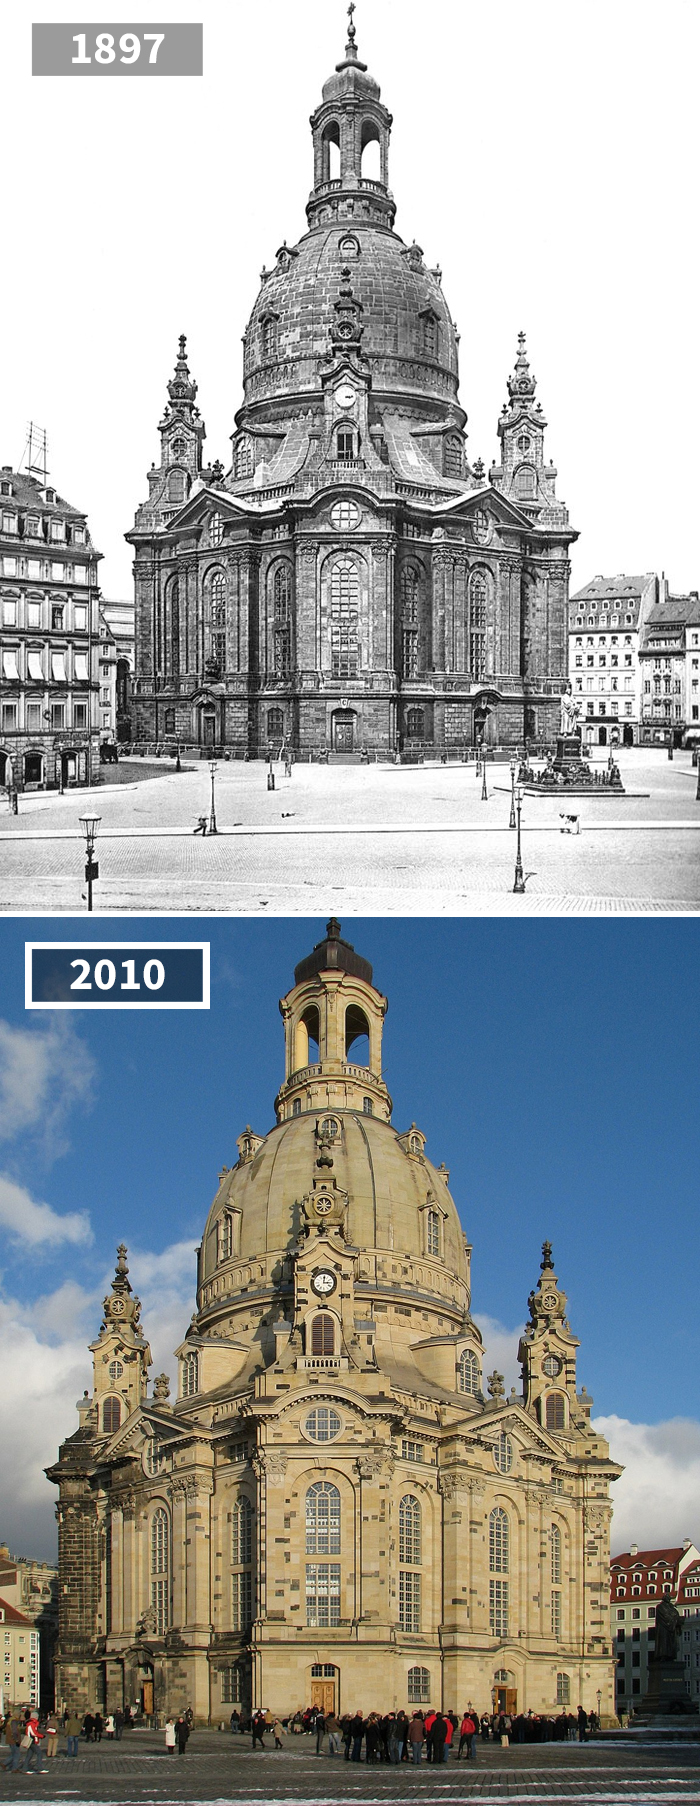 then-and-now-pictures-changing-world-rephotos-60-5a0d76c954777__700.jpg